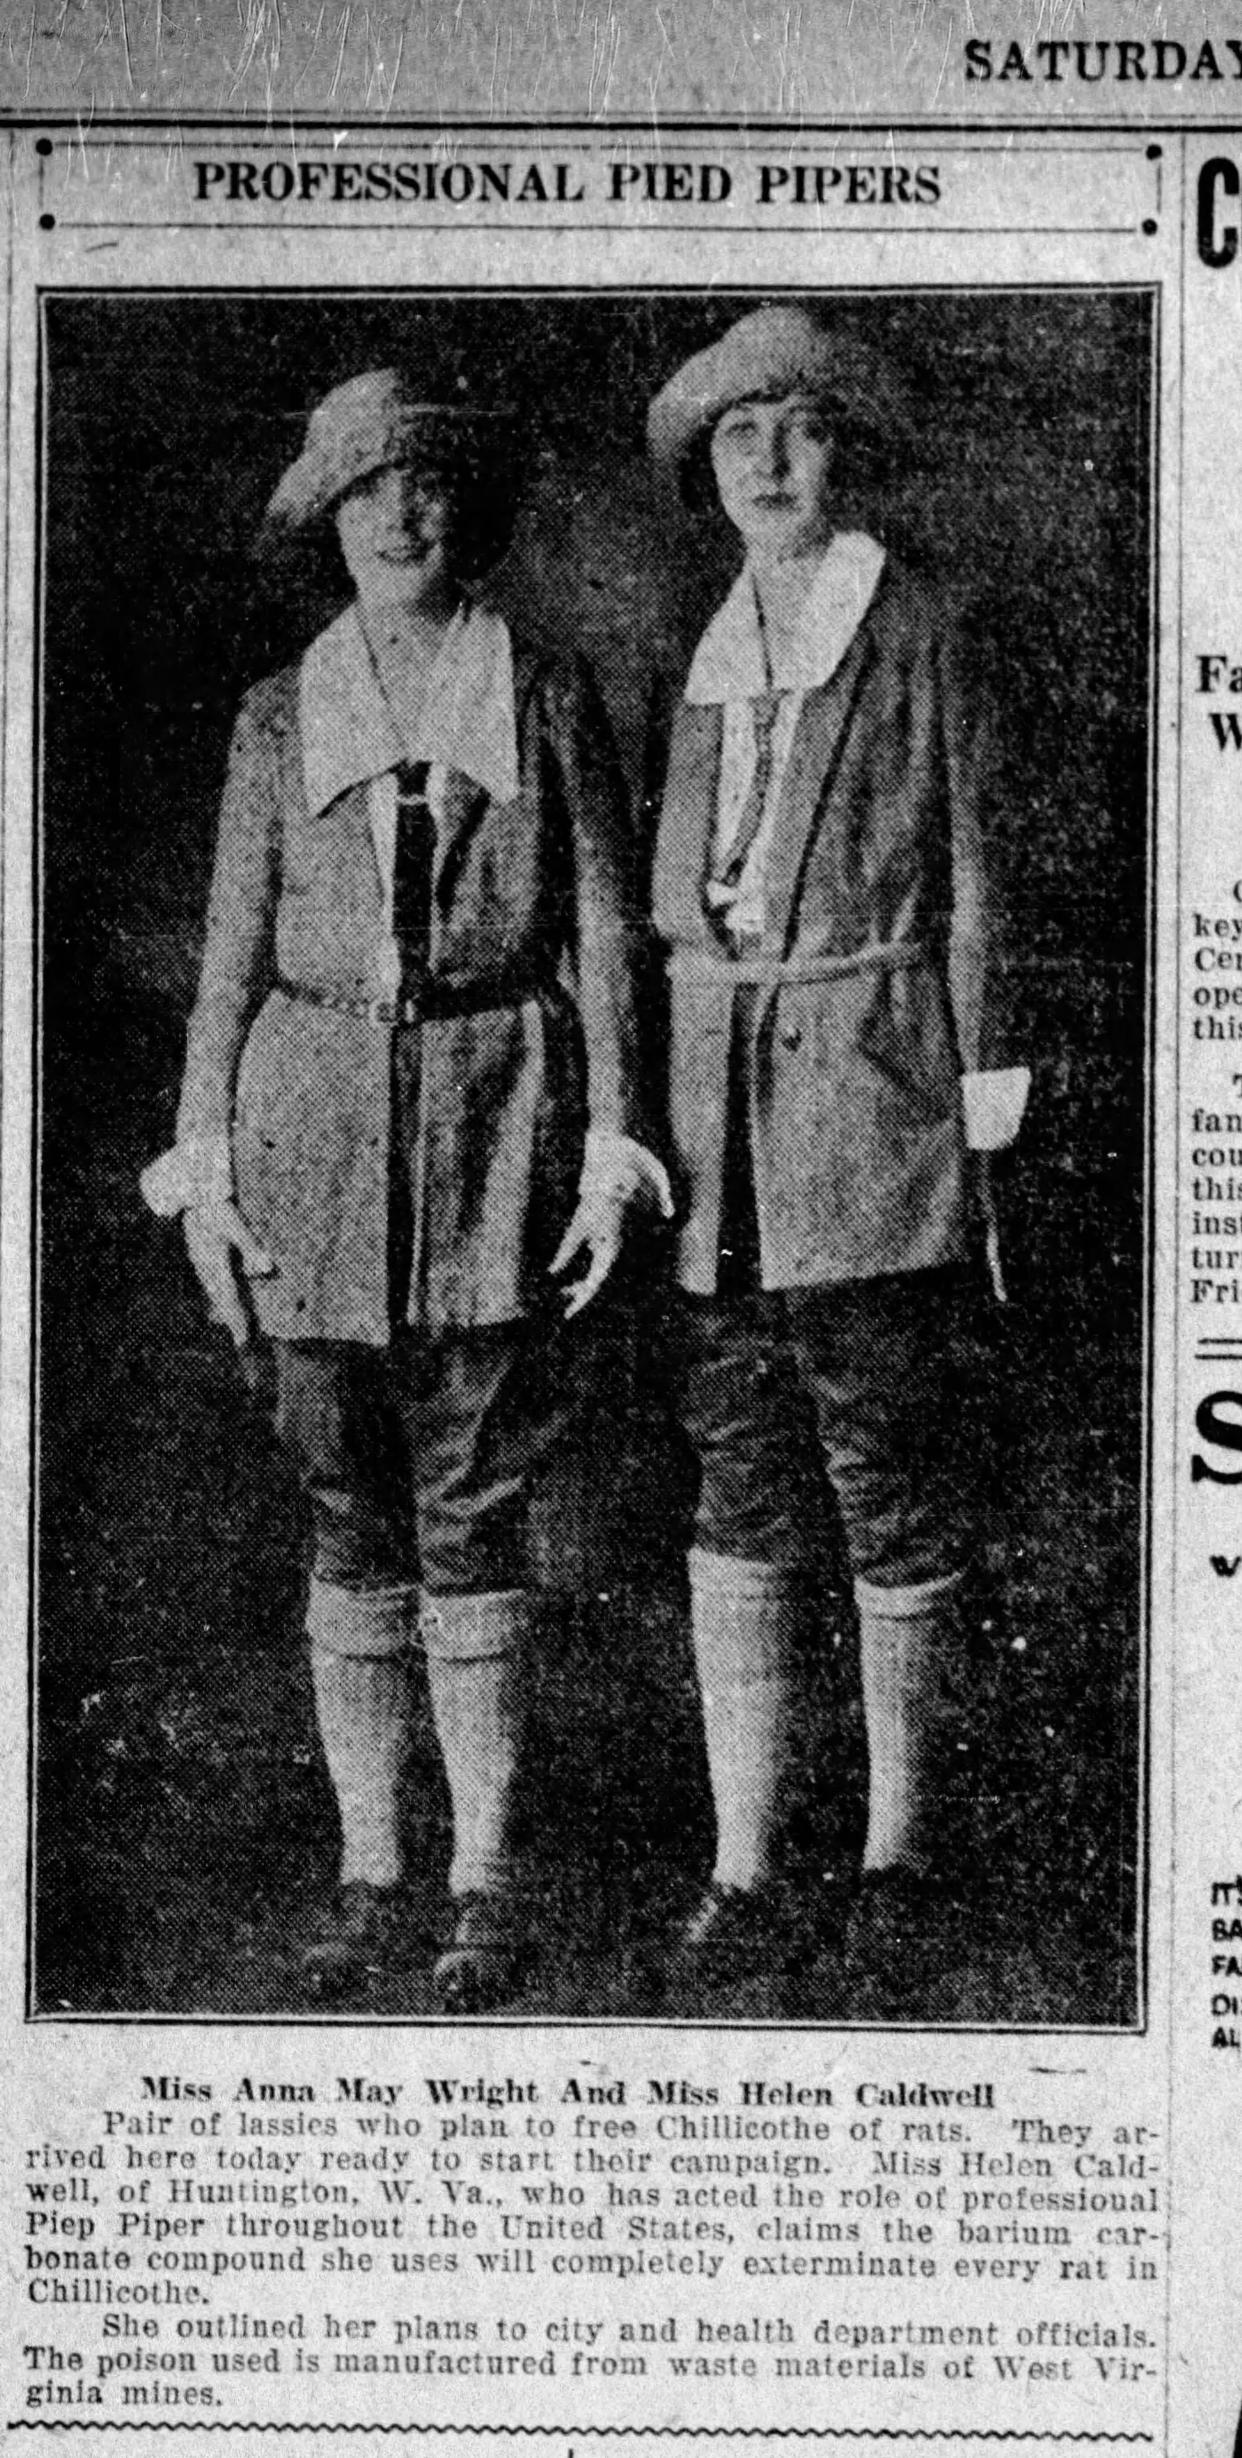 A clipping from the Saturday, Feb 16, 1924 Chillicothe Gazette featuring Helen Caldwell and Anna Mae Wright, two young women who were gaining national fame, stopped in Chillicothe and appeared before the Health Department and Chamber of Commerce.